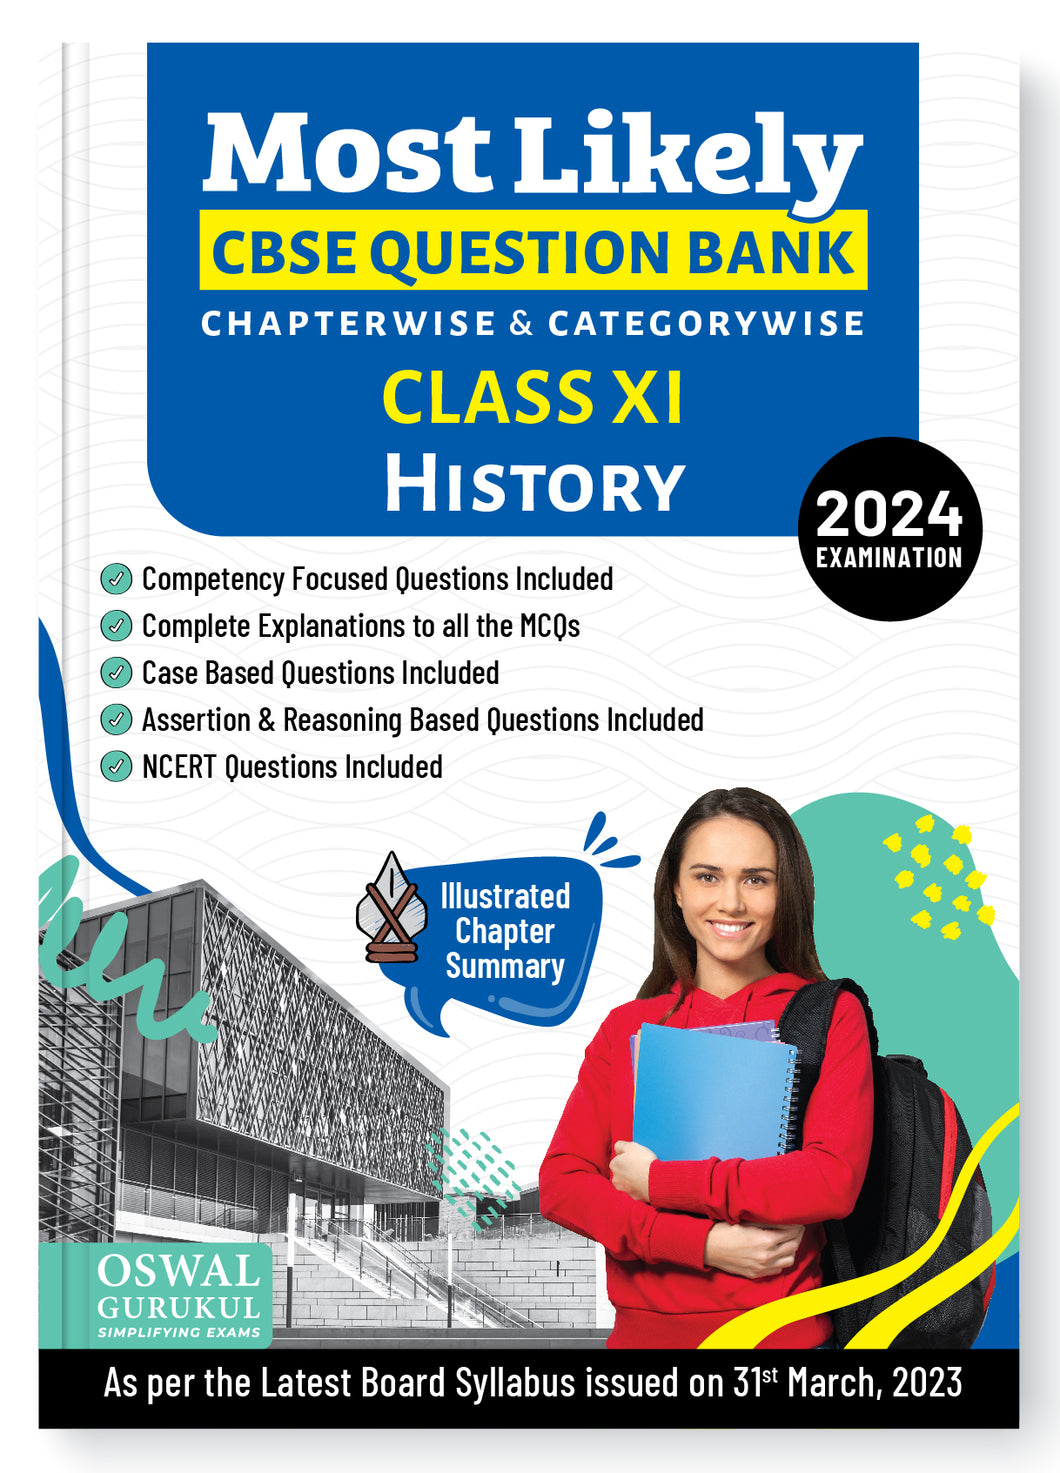 Oswal - Gurukul History Most Likely CBSE Question Bank : Class 11 Exam 2024